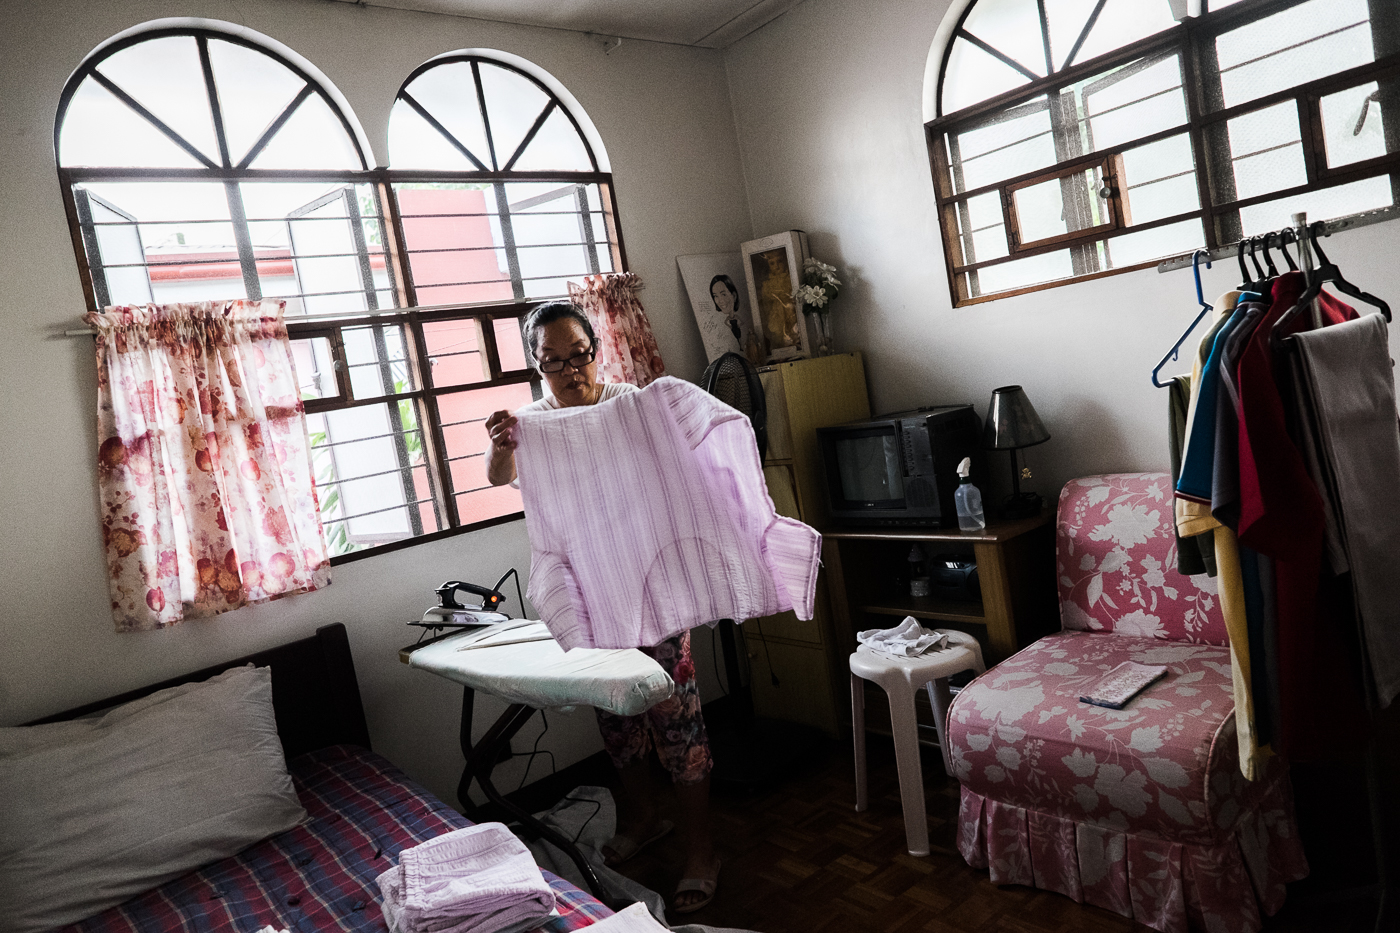 MULTI-TASKING. Anna irons her employer's clothes. She works for 3 different employers and schedules her shifts 6 days a week. She has a son, Buboy, who also works as a helper for the same family.  